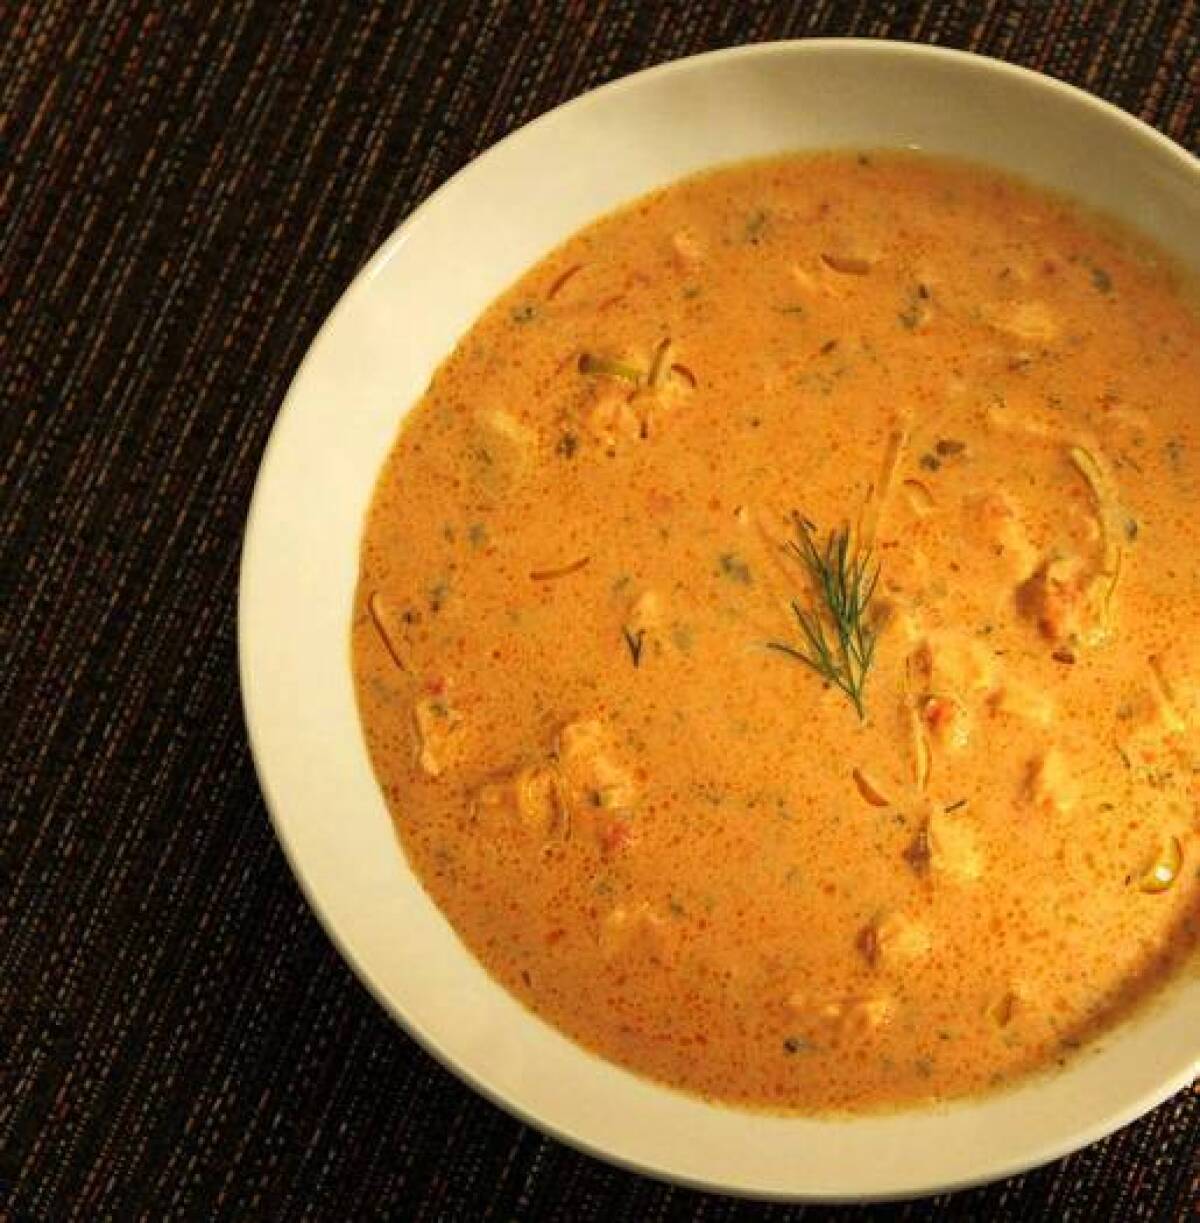 Rich and creamy salmon bisque.